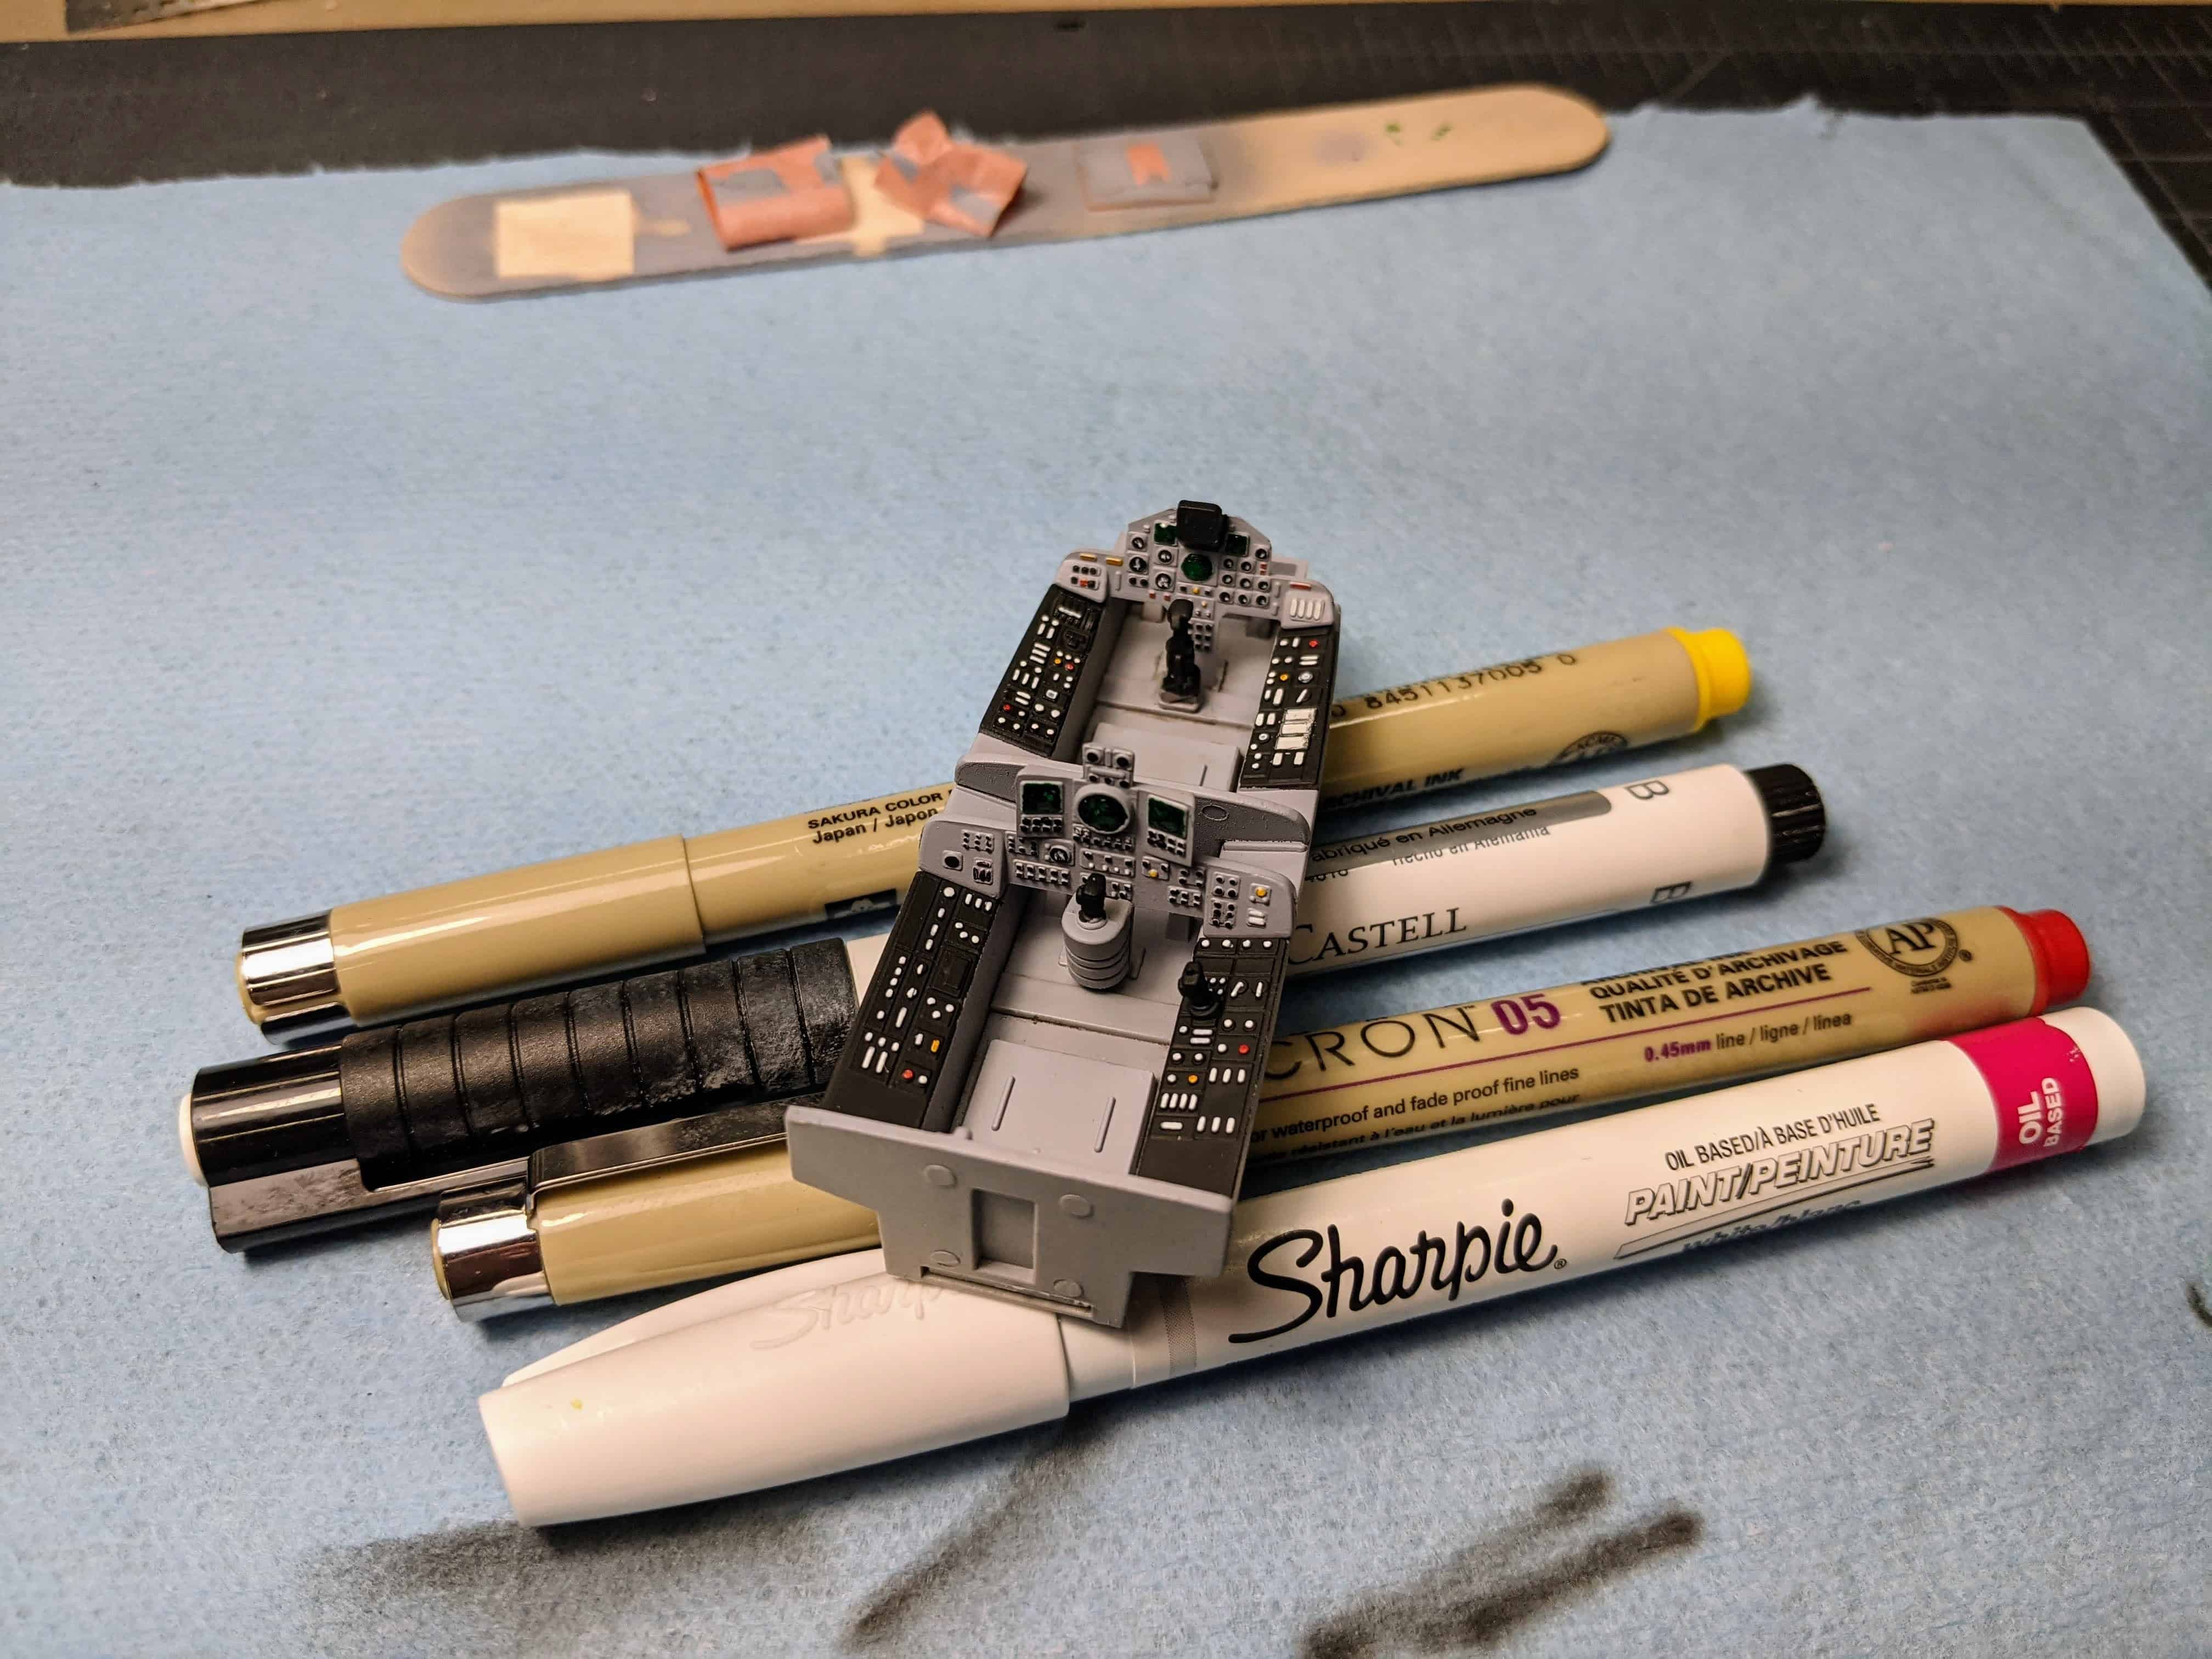 Cockpit detailed with pens